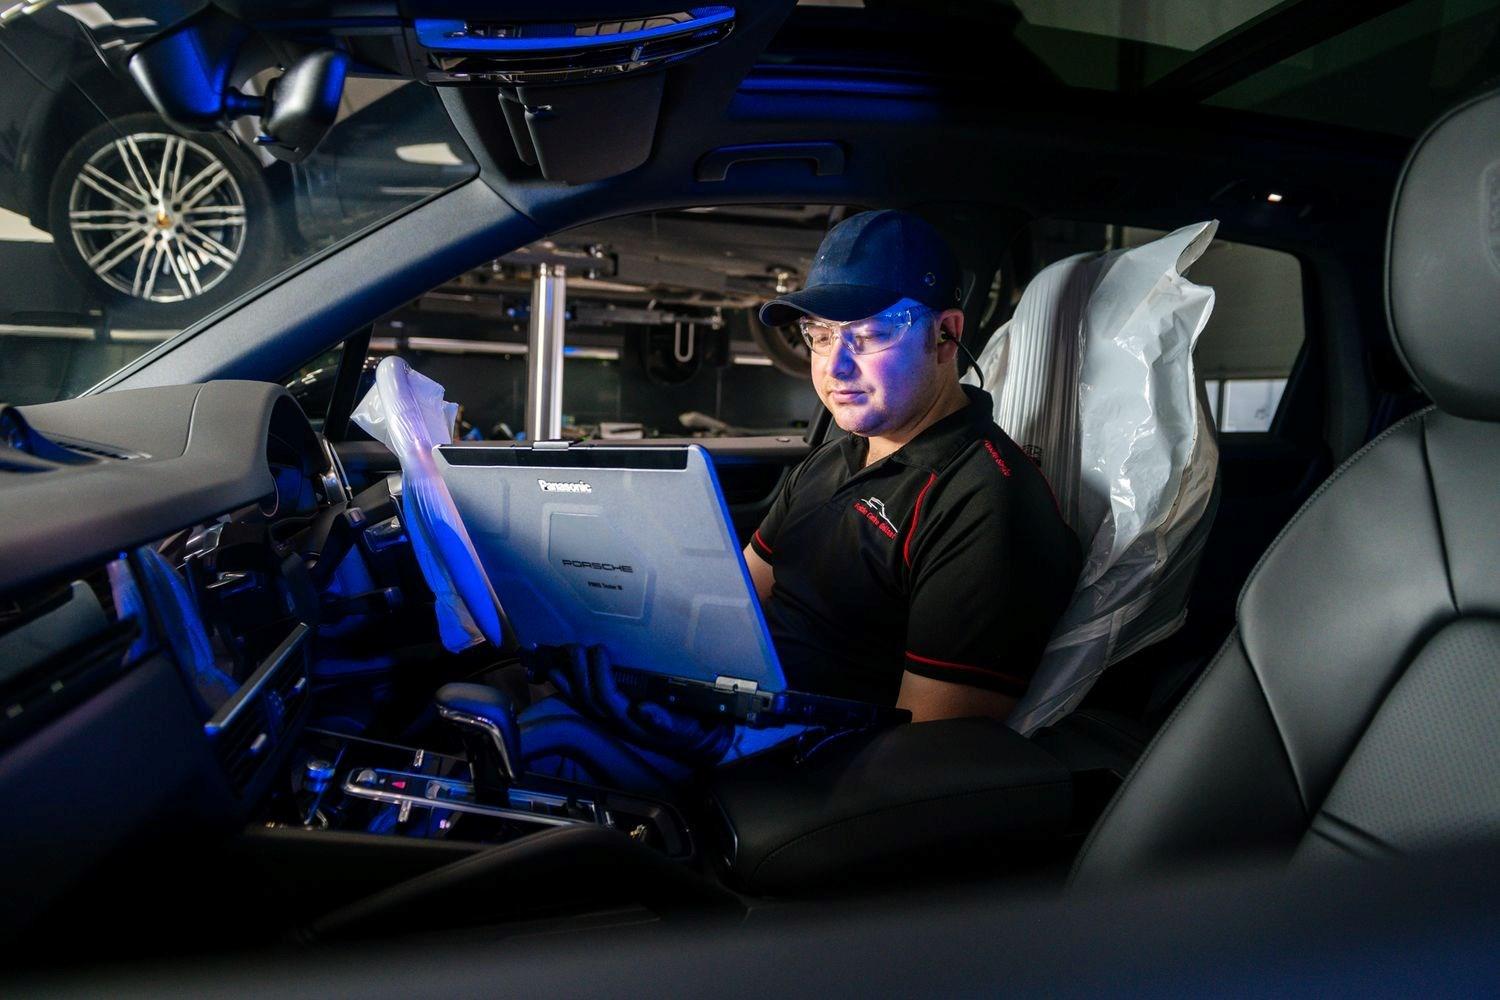 Porsche Centre Belfast Repair Specialist inspects the interior of a Porsche vehicle with laptop for internal electric maintenance and repairs at the Porsche Approved Repair Centre